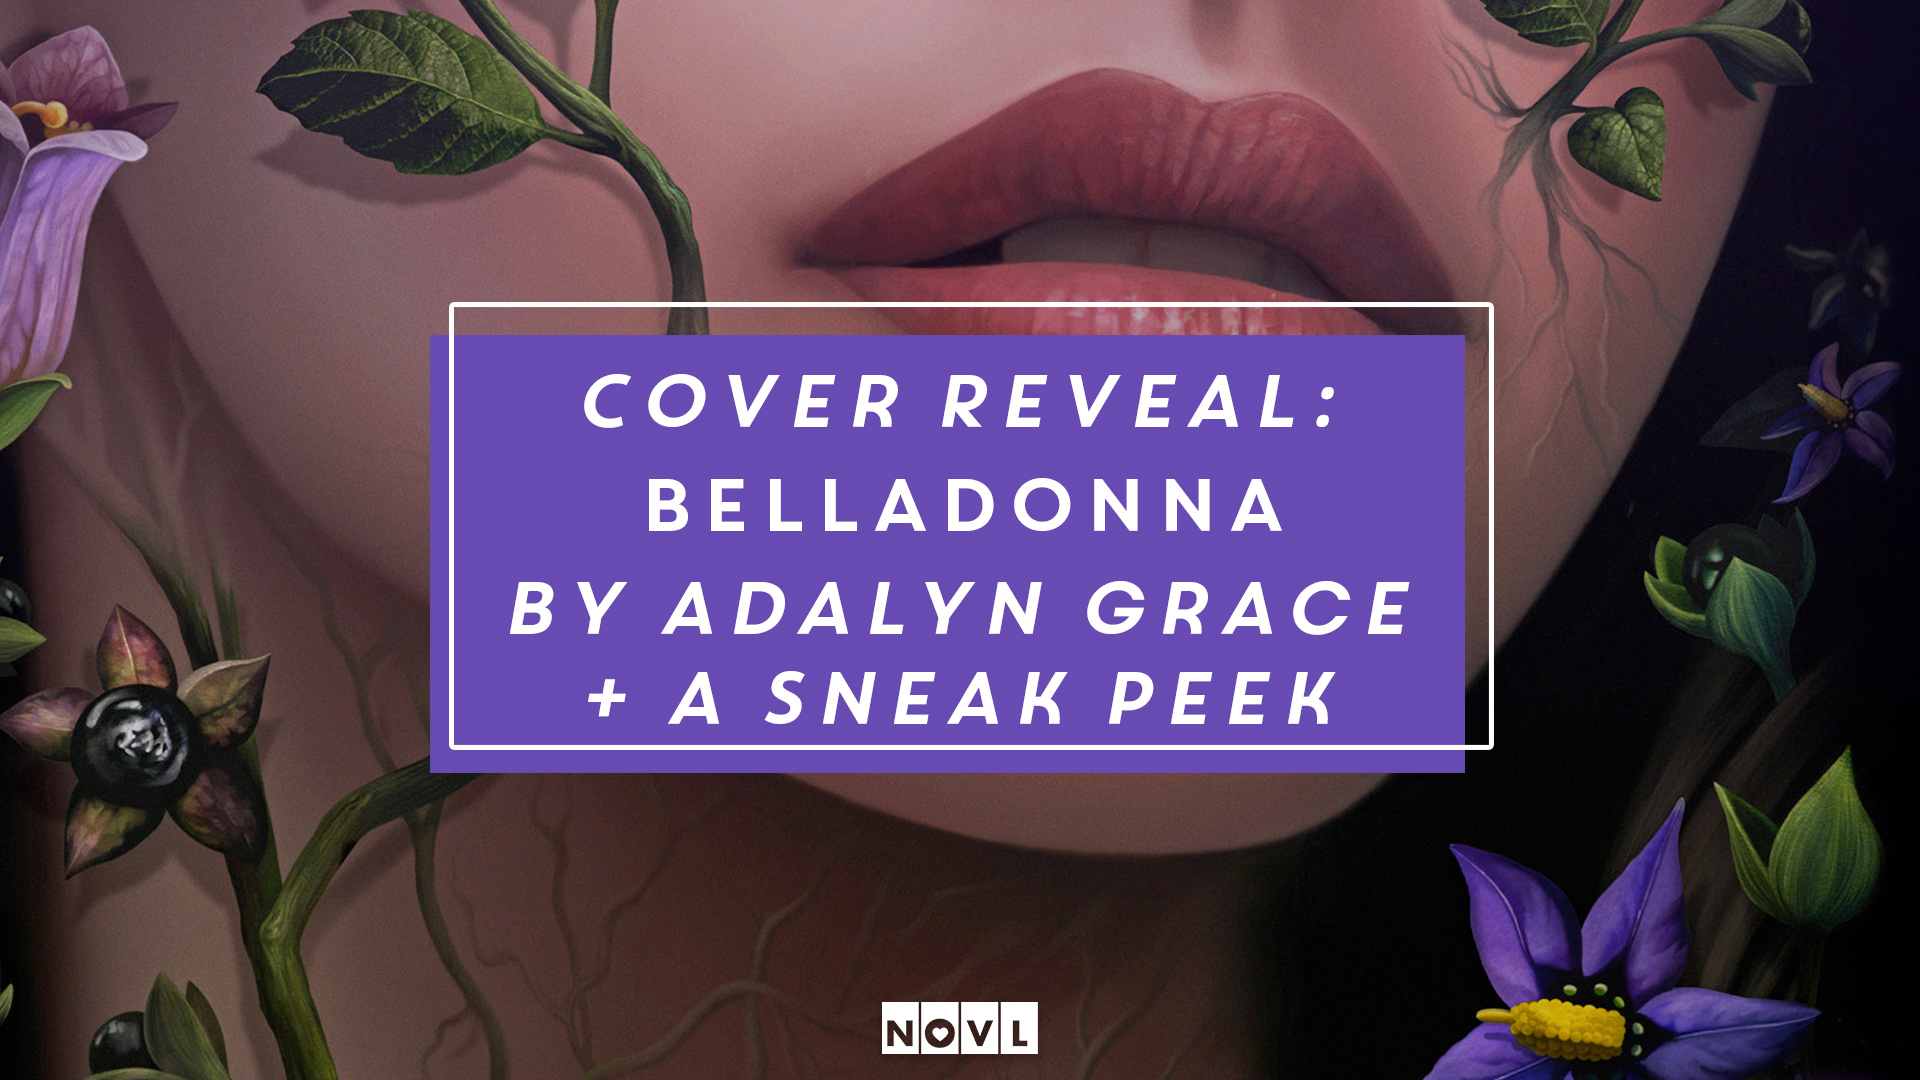 The NOVL Blog, Featured Image for Article: Cover Reveal: Belladonna by Adalyn Grace